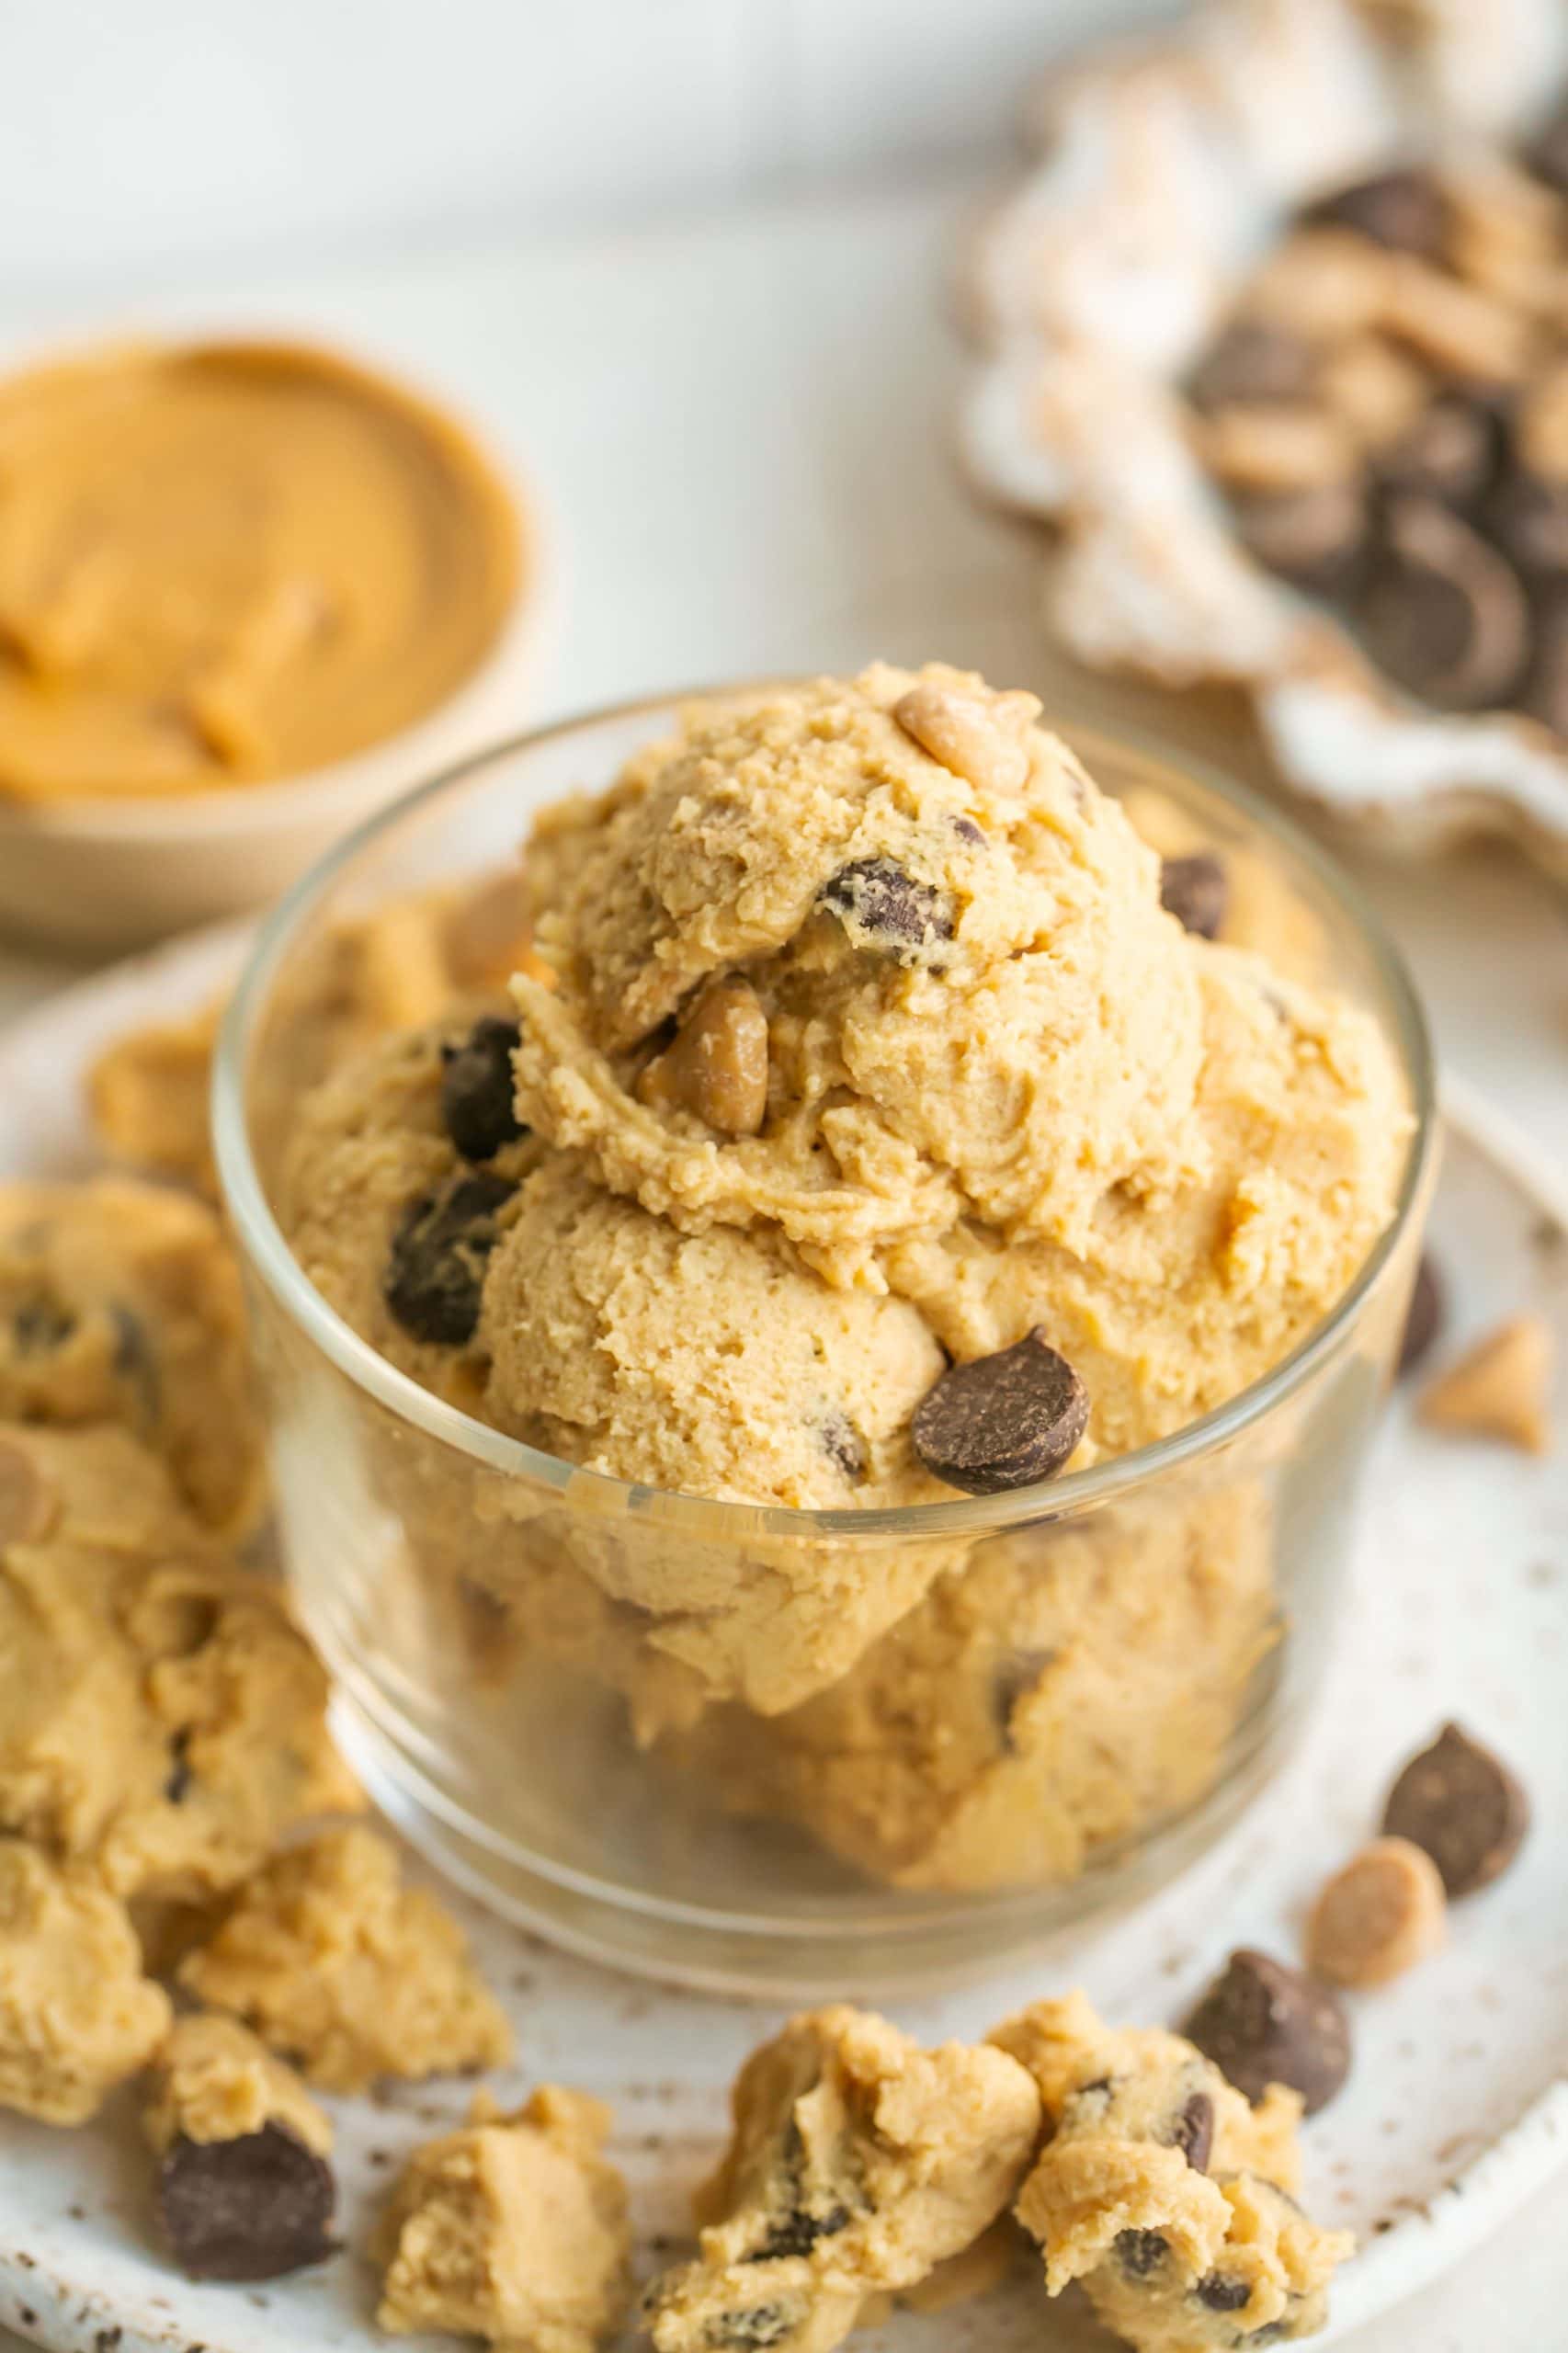 Scoops of peanut butter cookie dough in glass cup.